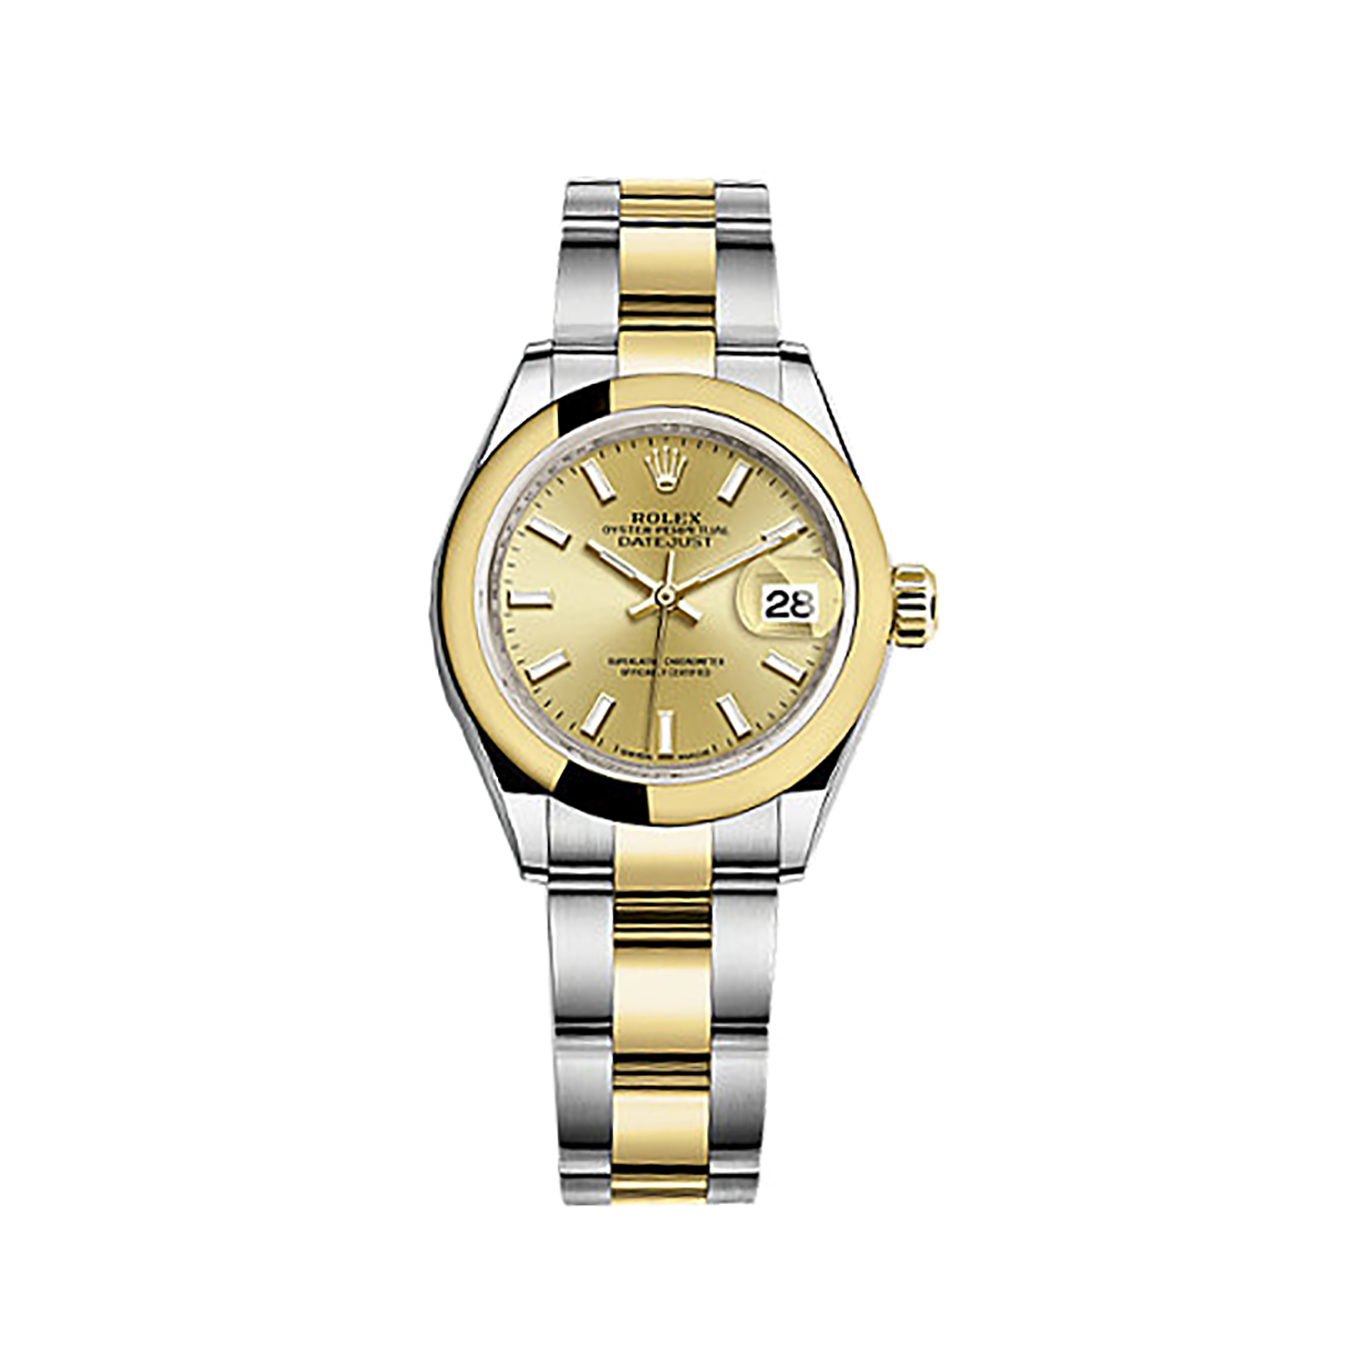 Lady-Datejust 28 279163 Gold & Stainless Steel Watch (Champagne)